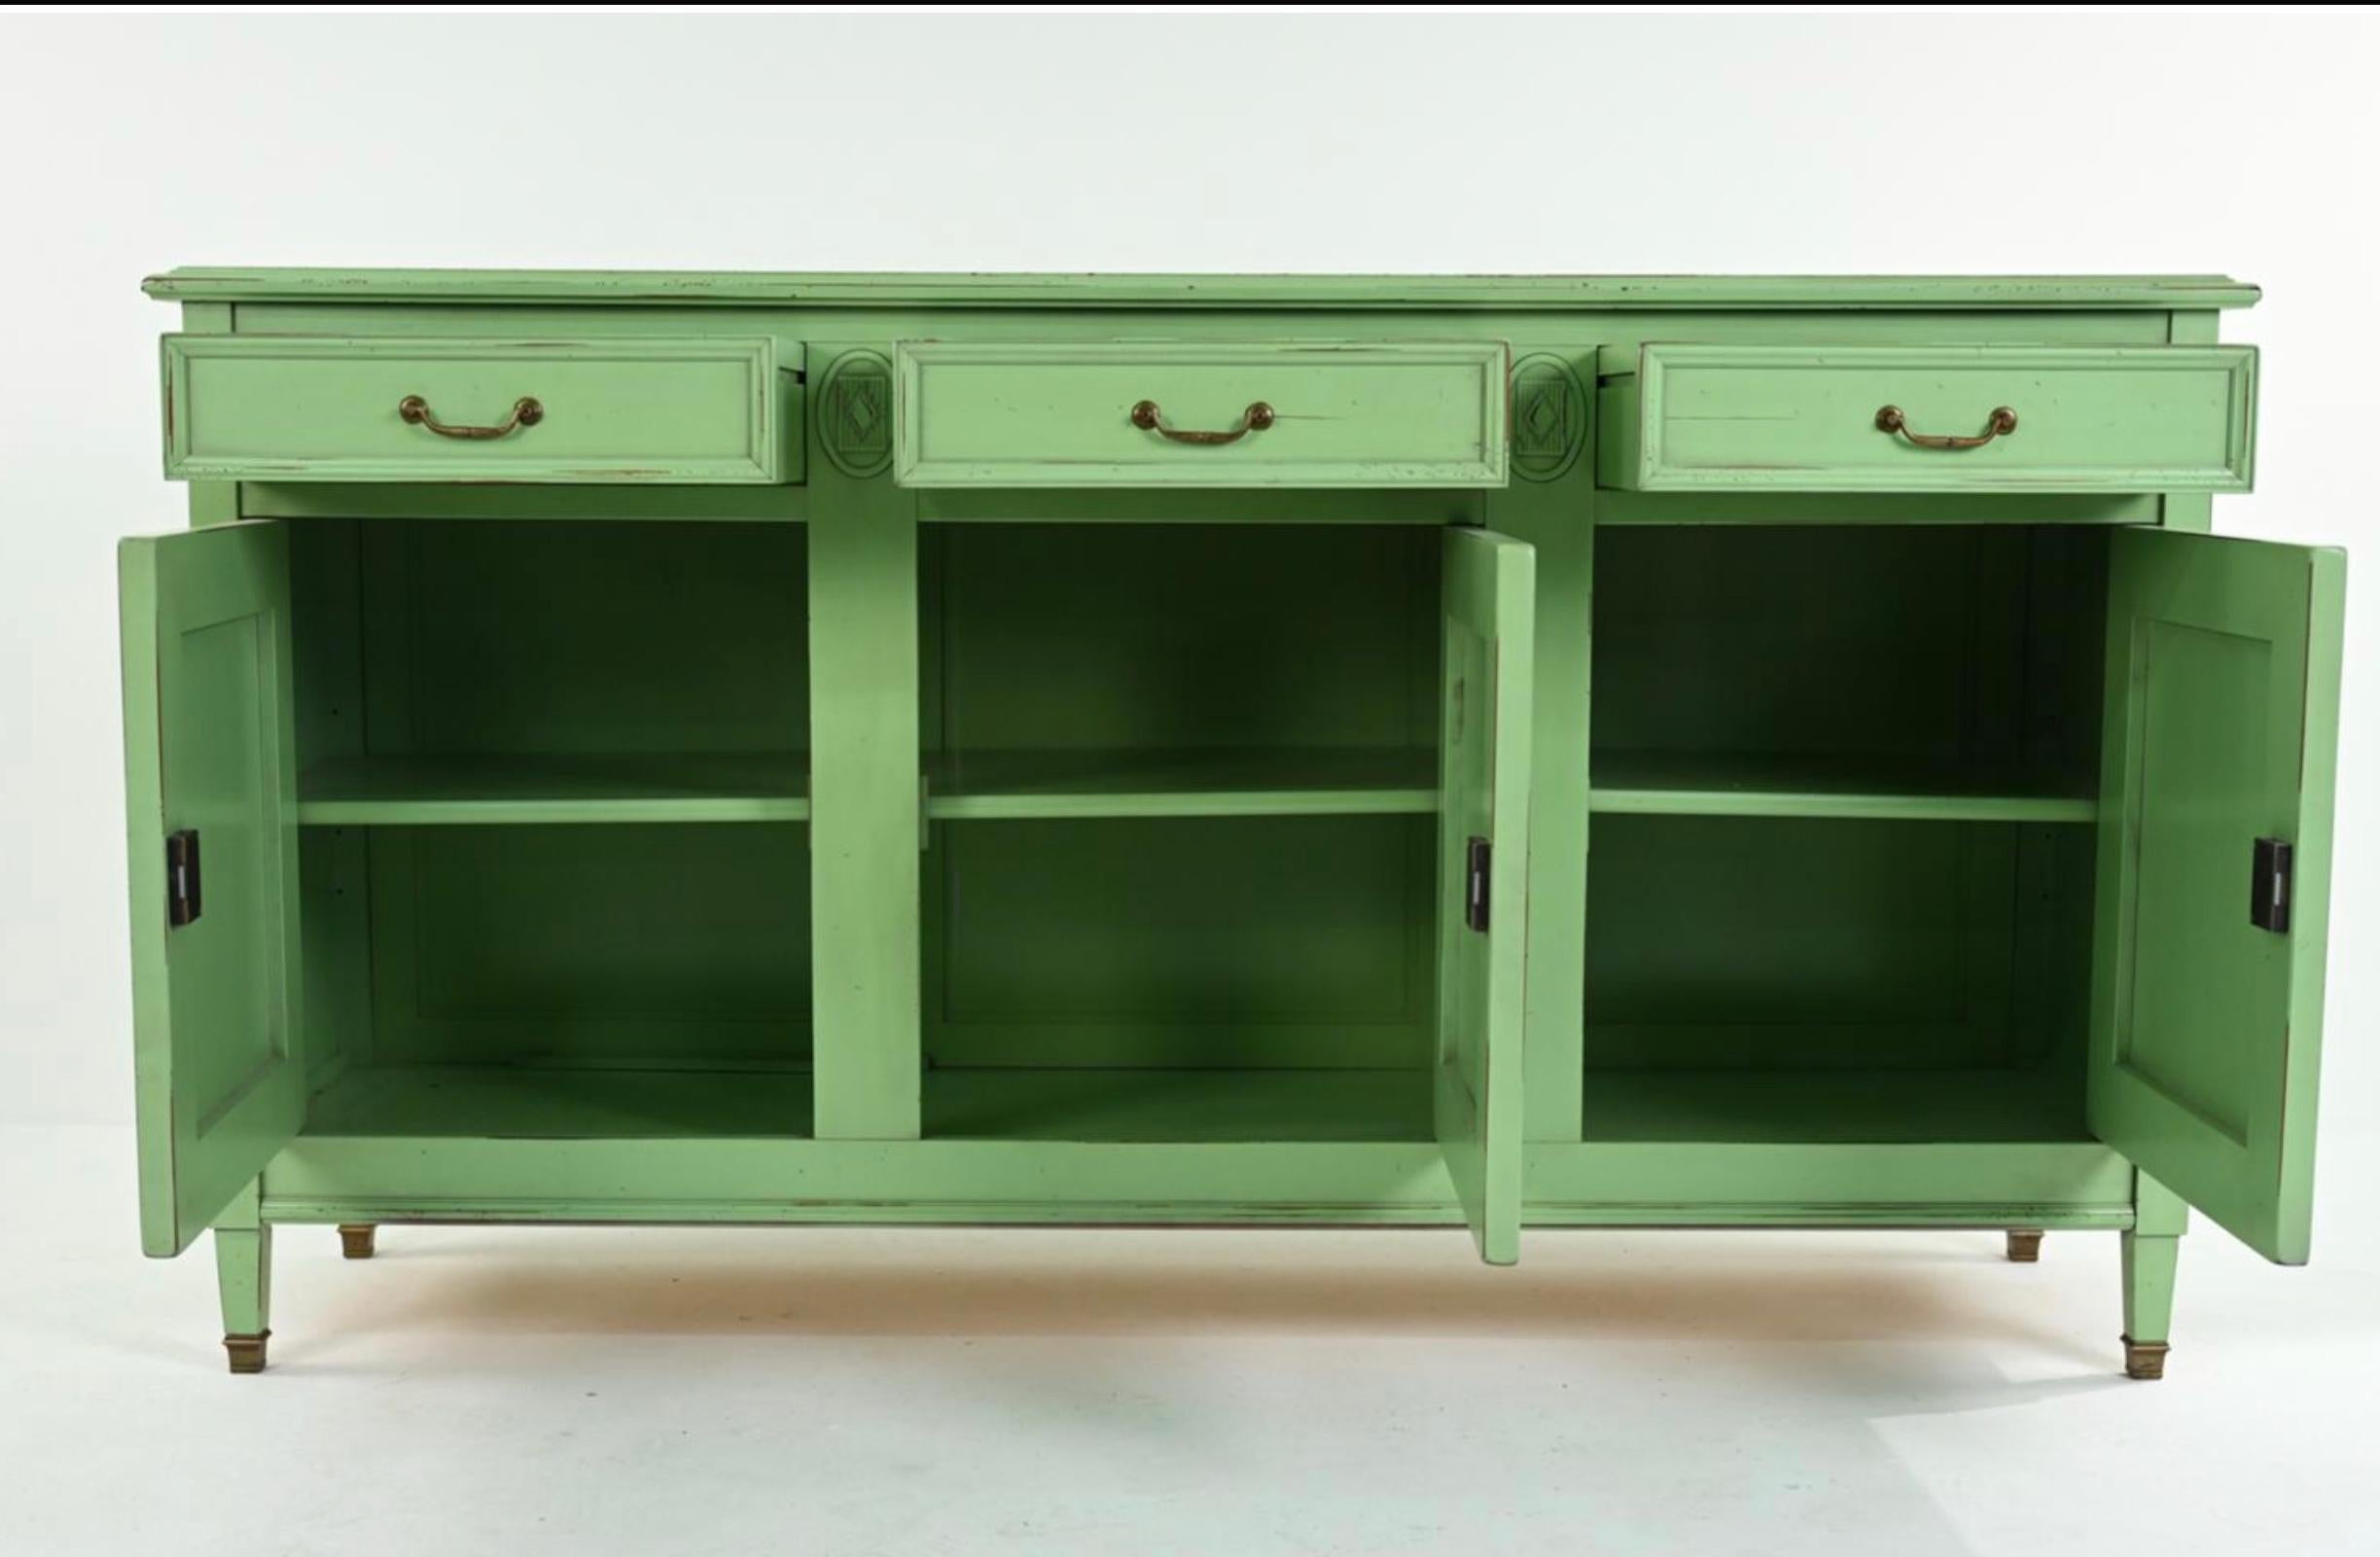 French Provincial custom green Grange furniture cupboard, sideboard, handmade. With label verso. Signed by craftsman. Contemporary French cabinet with green decorative painting. Brass foot caps. Dimensions: H 40.75